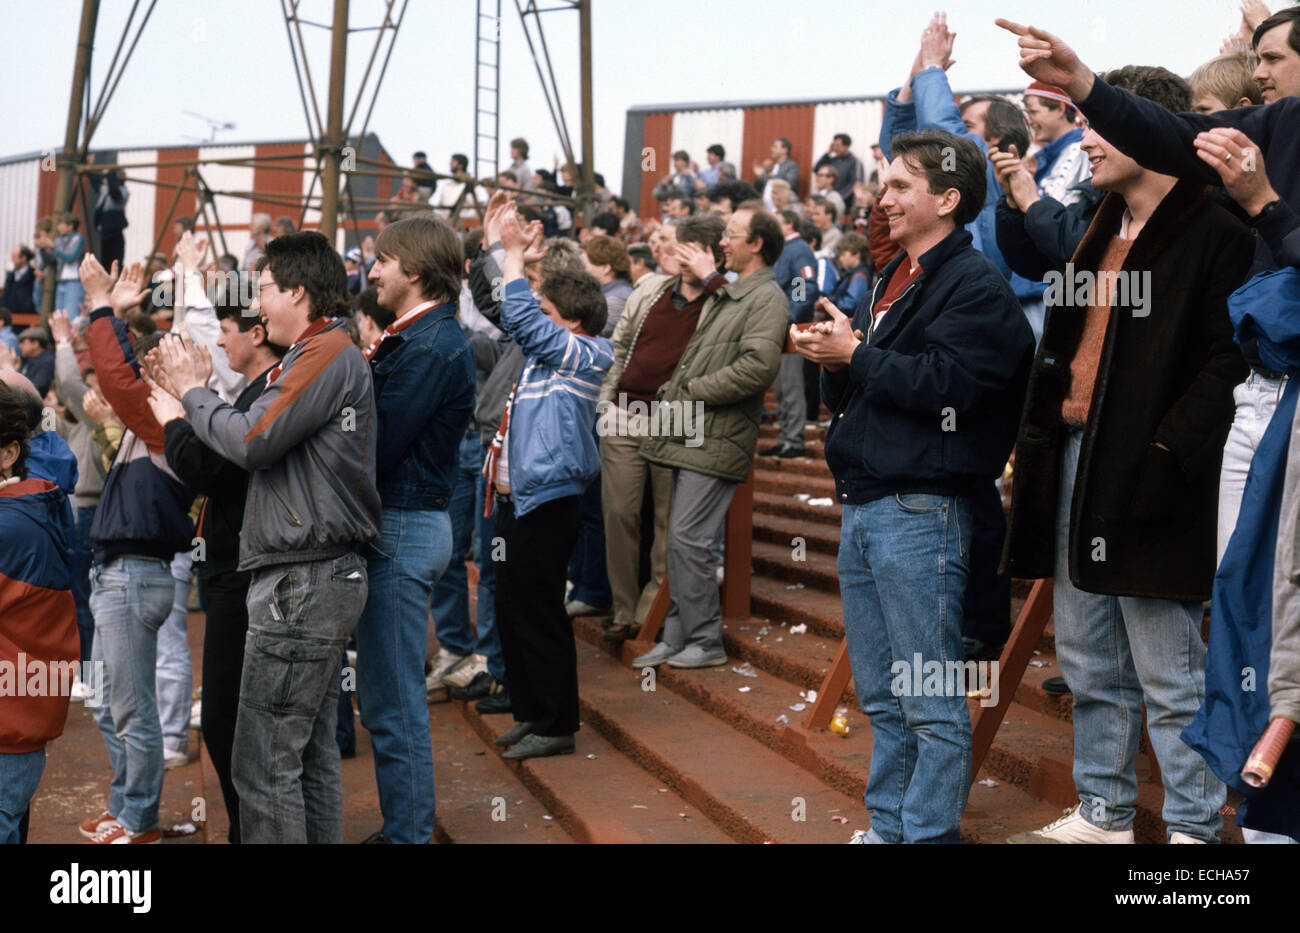 Football supporters Stock Photo